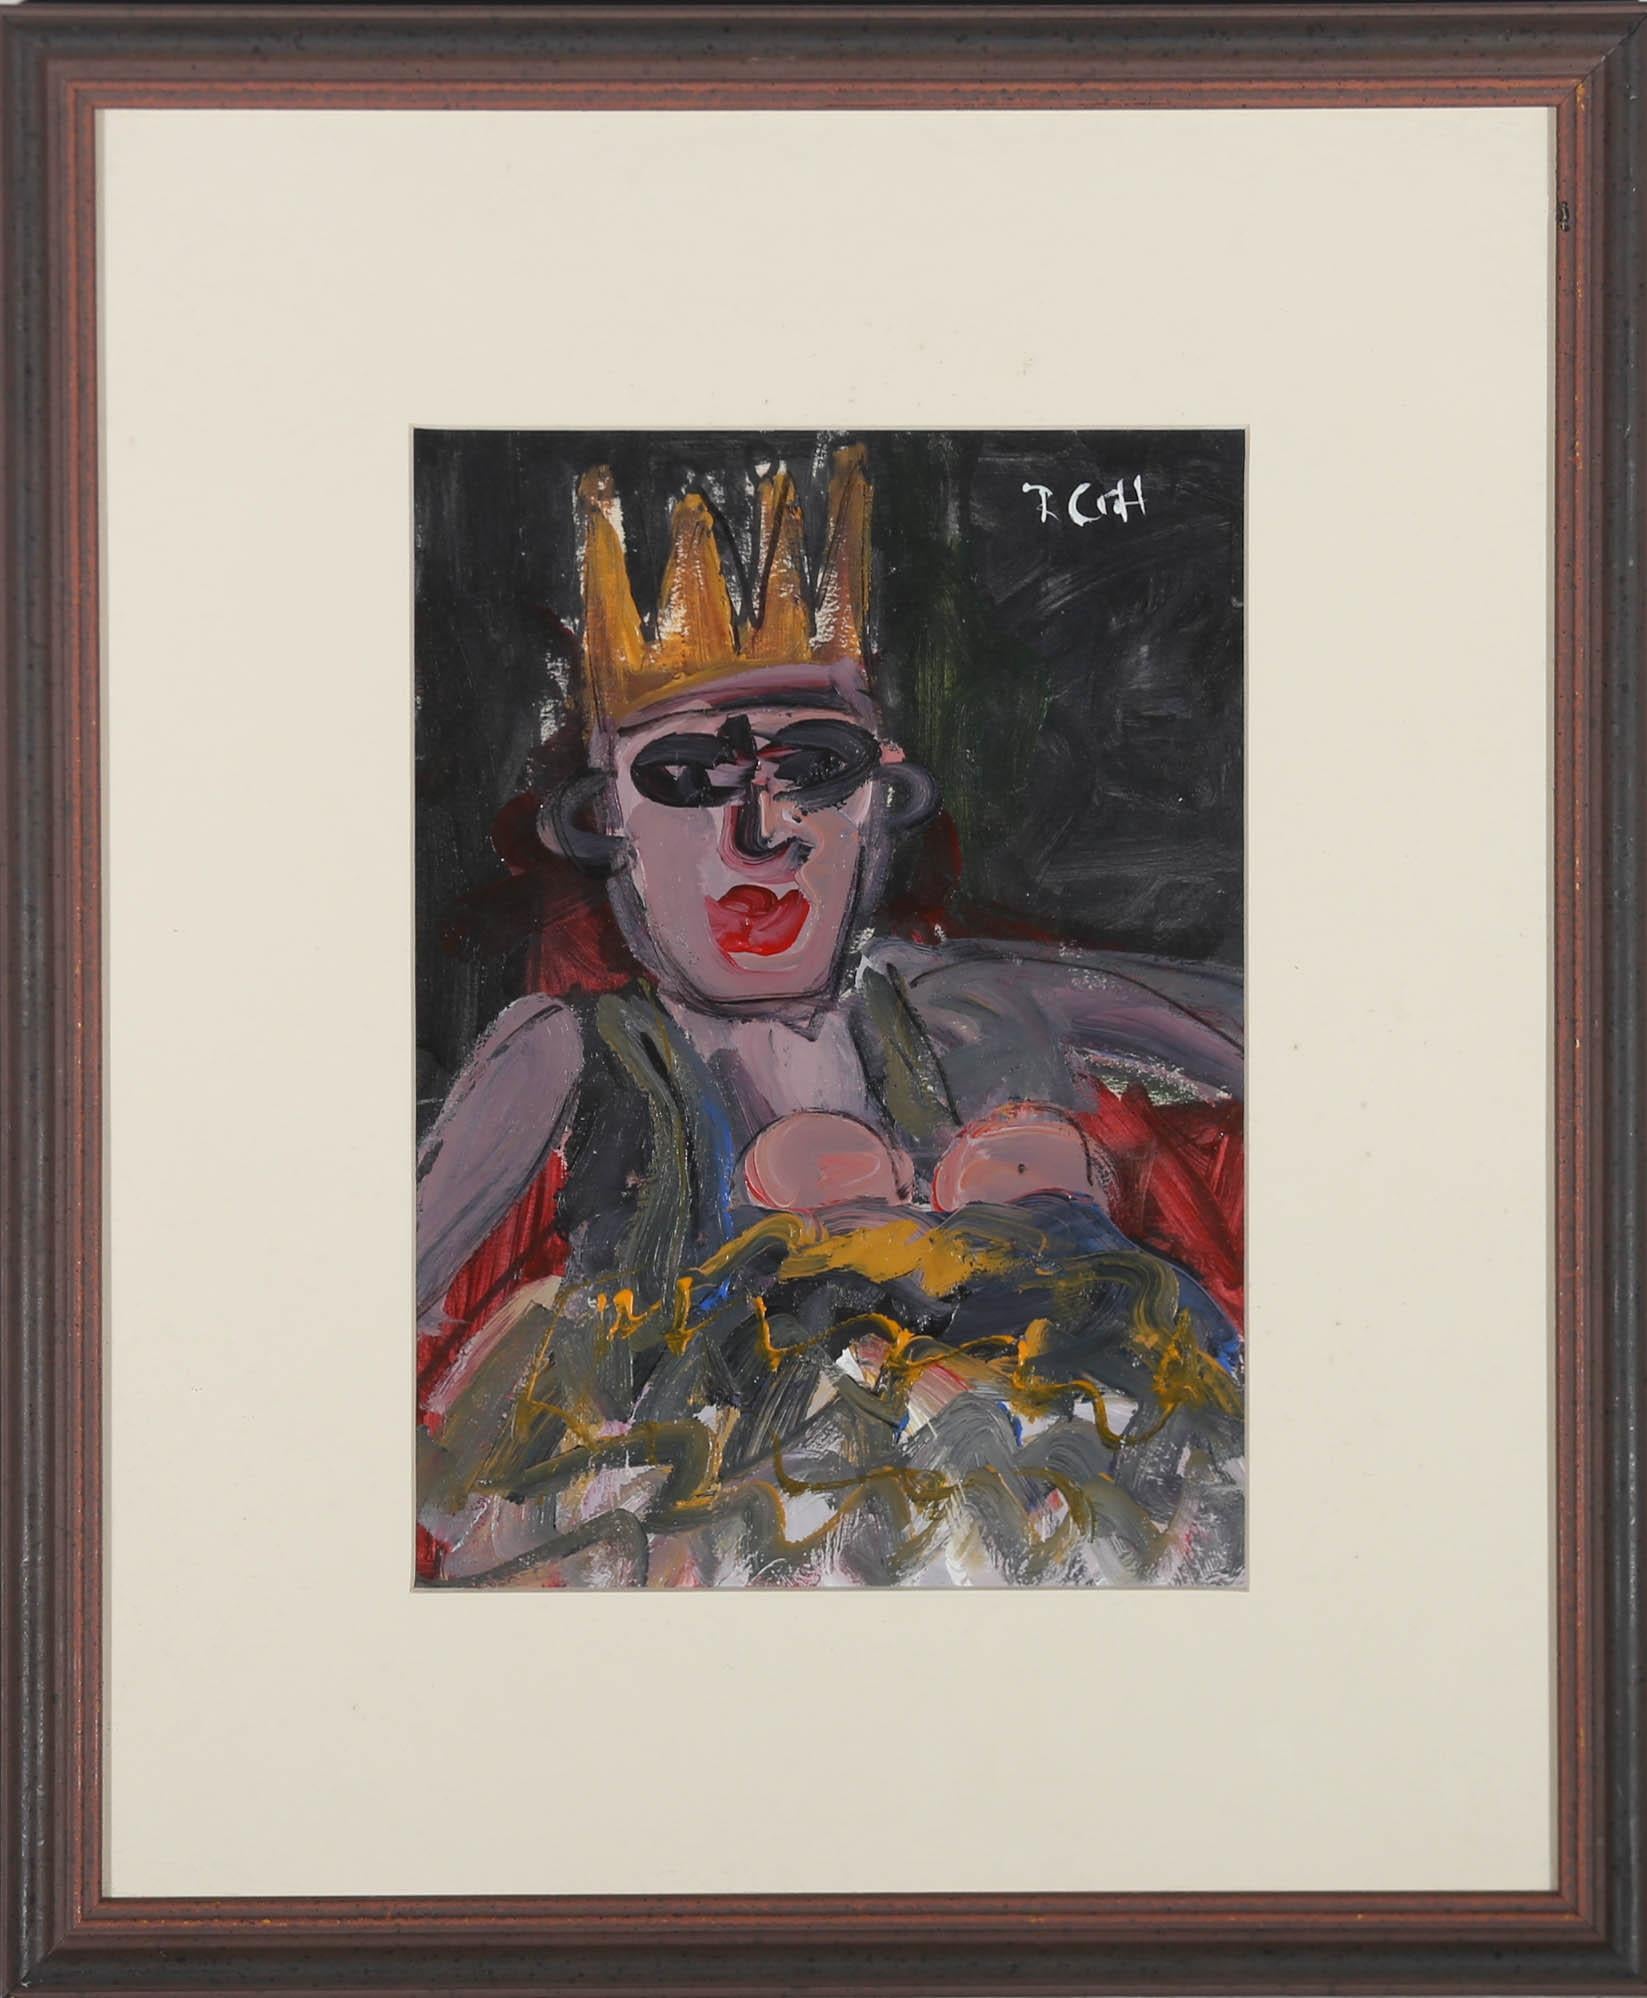 A charismatic depiction of the Queen of Sheba in an expressive style. The artist uses a fun colour palette and naïve features to create an endearing, fun portrait. Signed with initials to the upper right. Presented in a wooden frame and white card